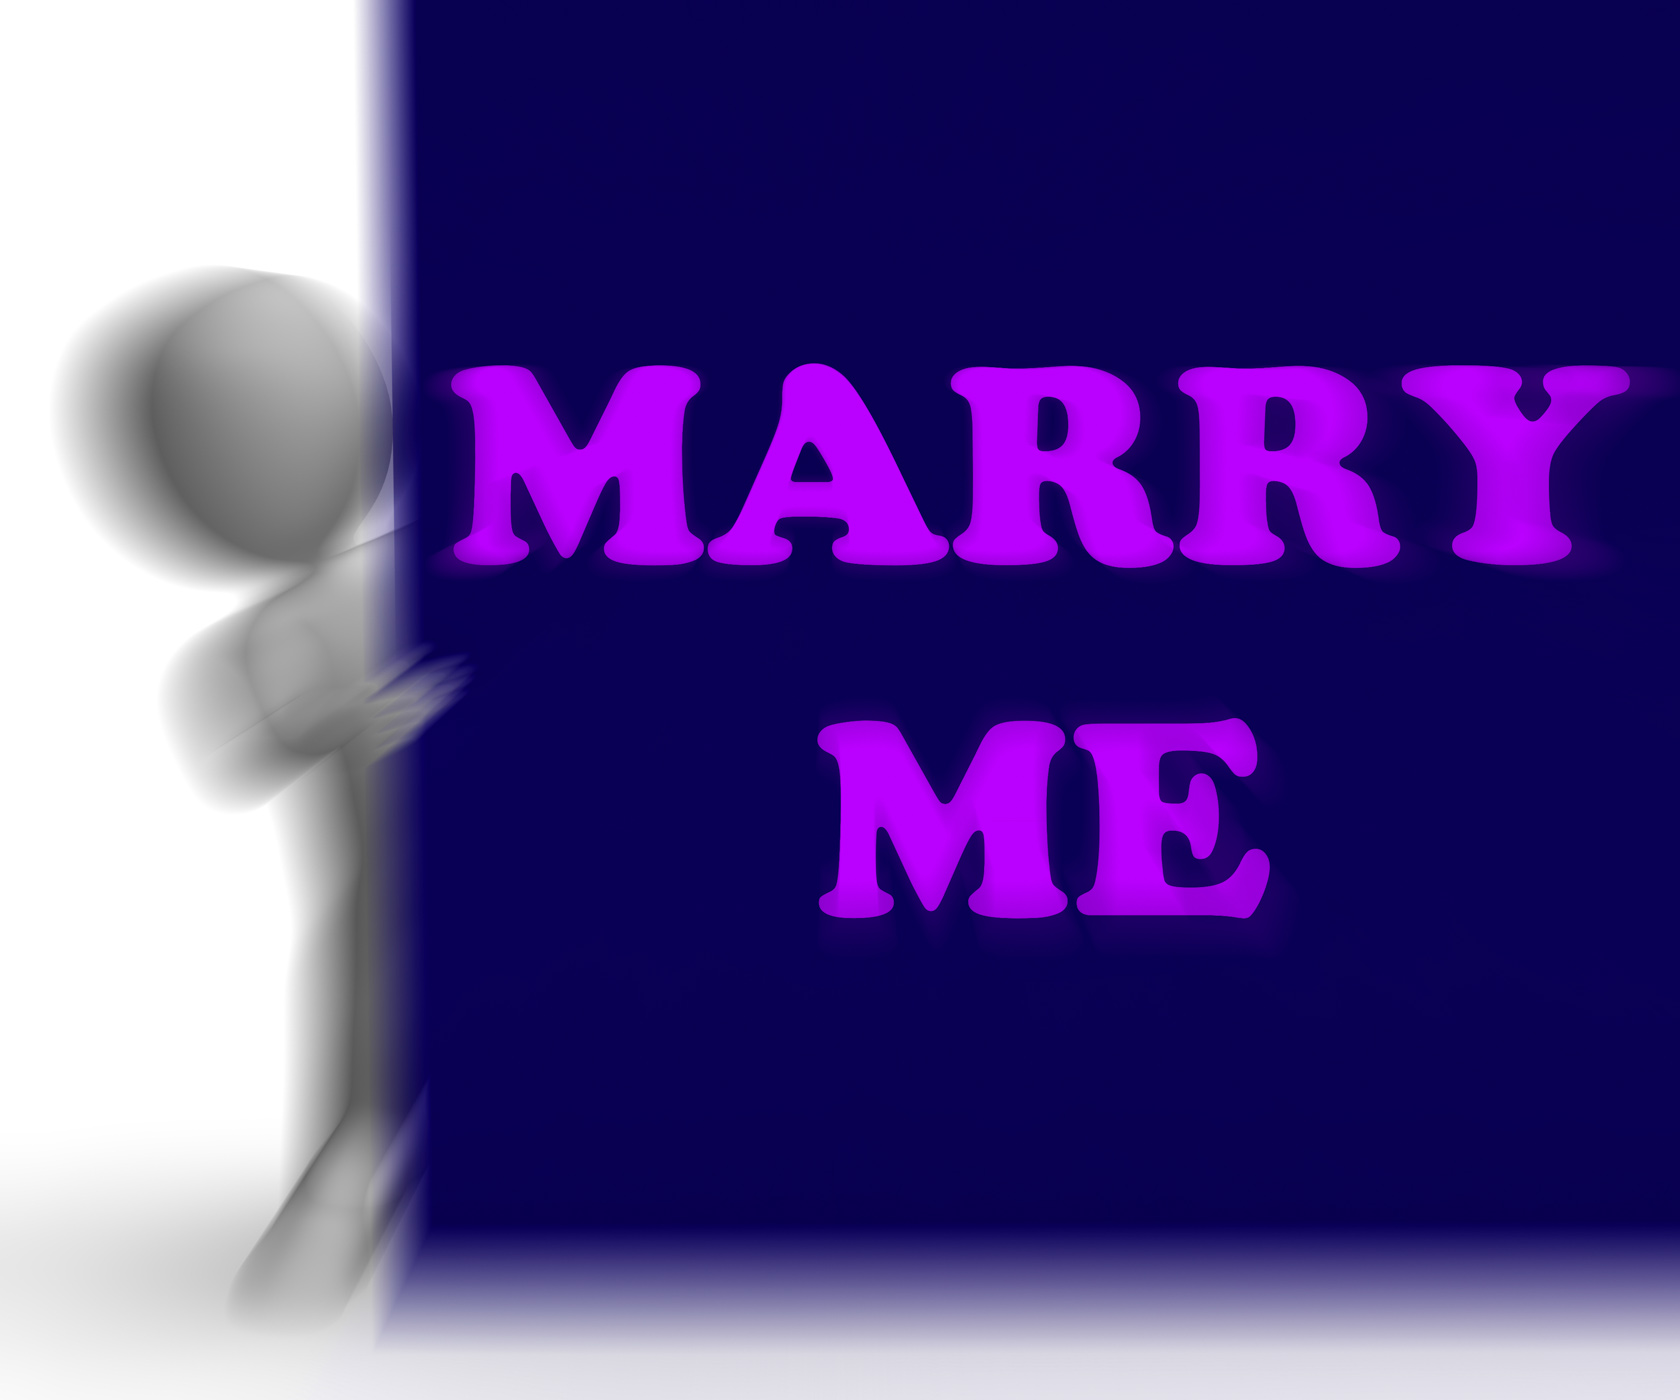 Marry me placard means romance and marriage photo